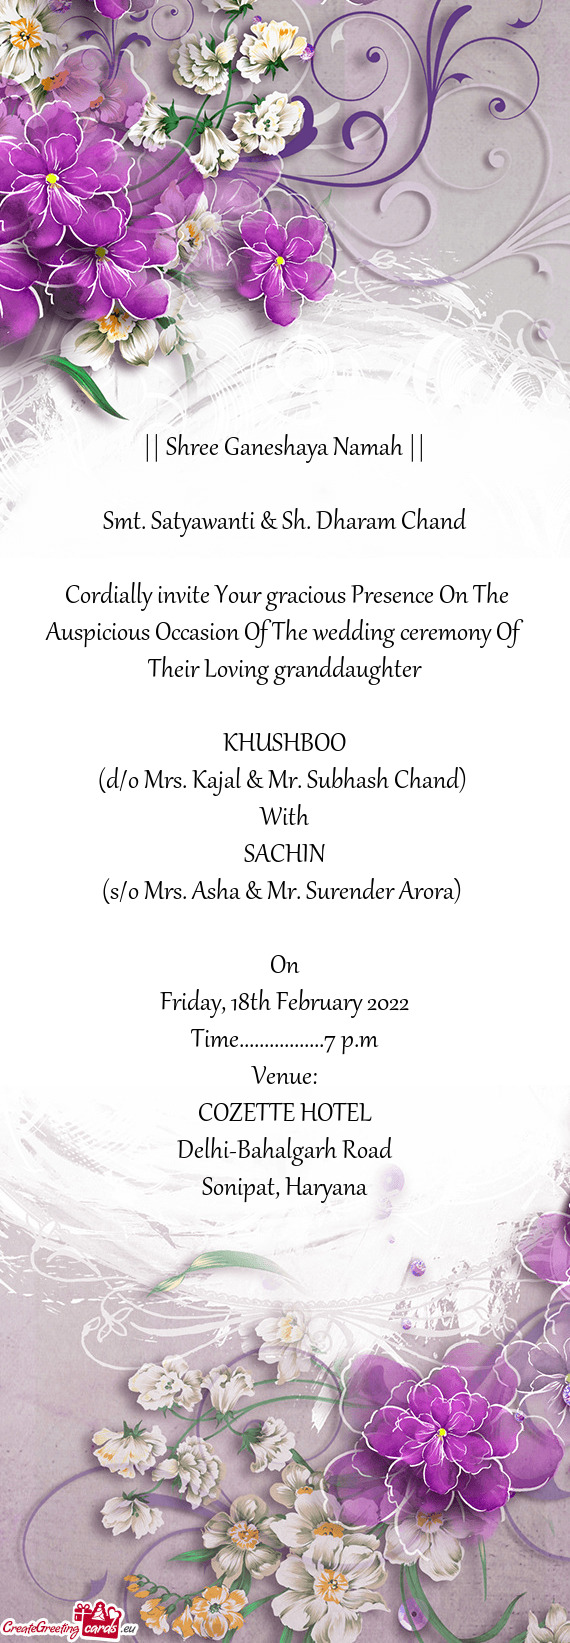 Dharam Chand
 
 Cordially invite Your gracious Presence On The Auspicious Occasion Of The wedding